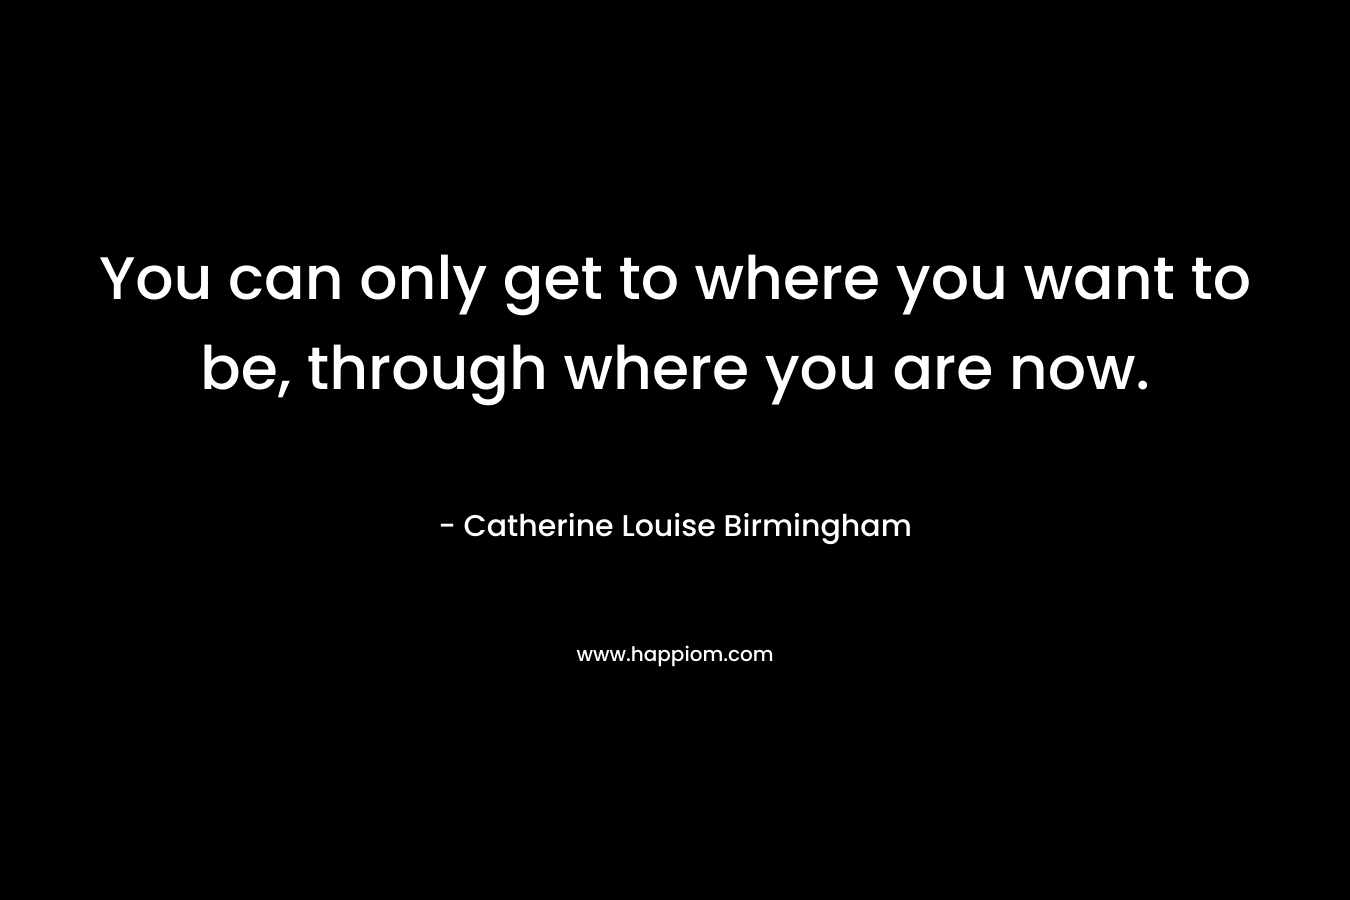 You can only get to where you want to be, through where you are now. – Catherine Louise Birmingham